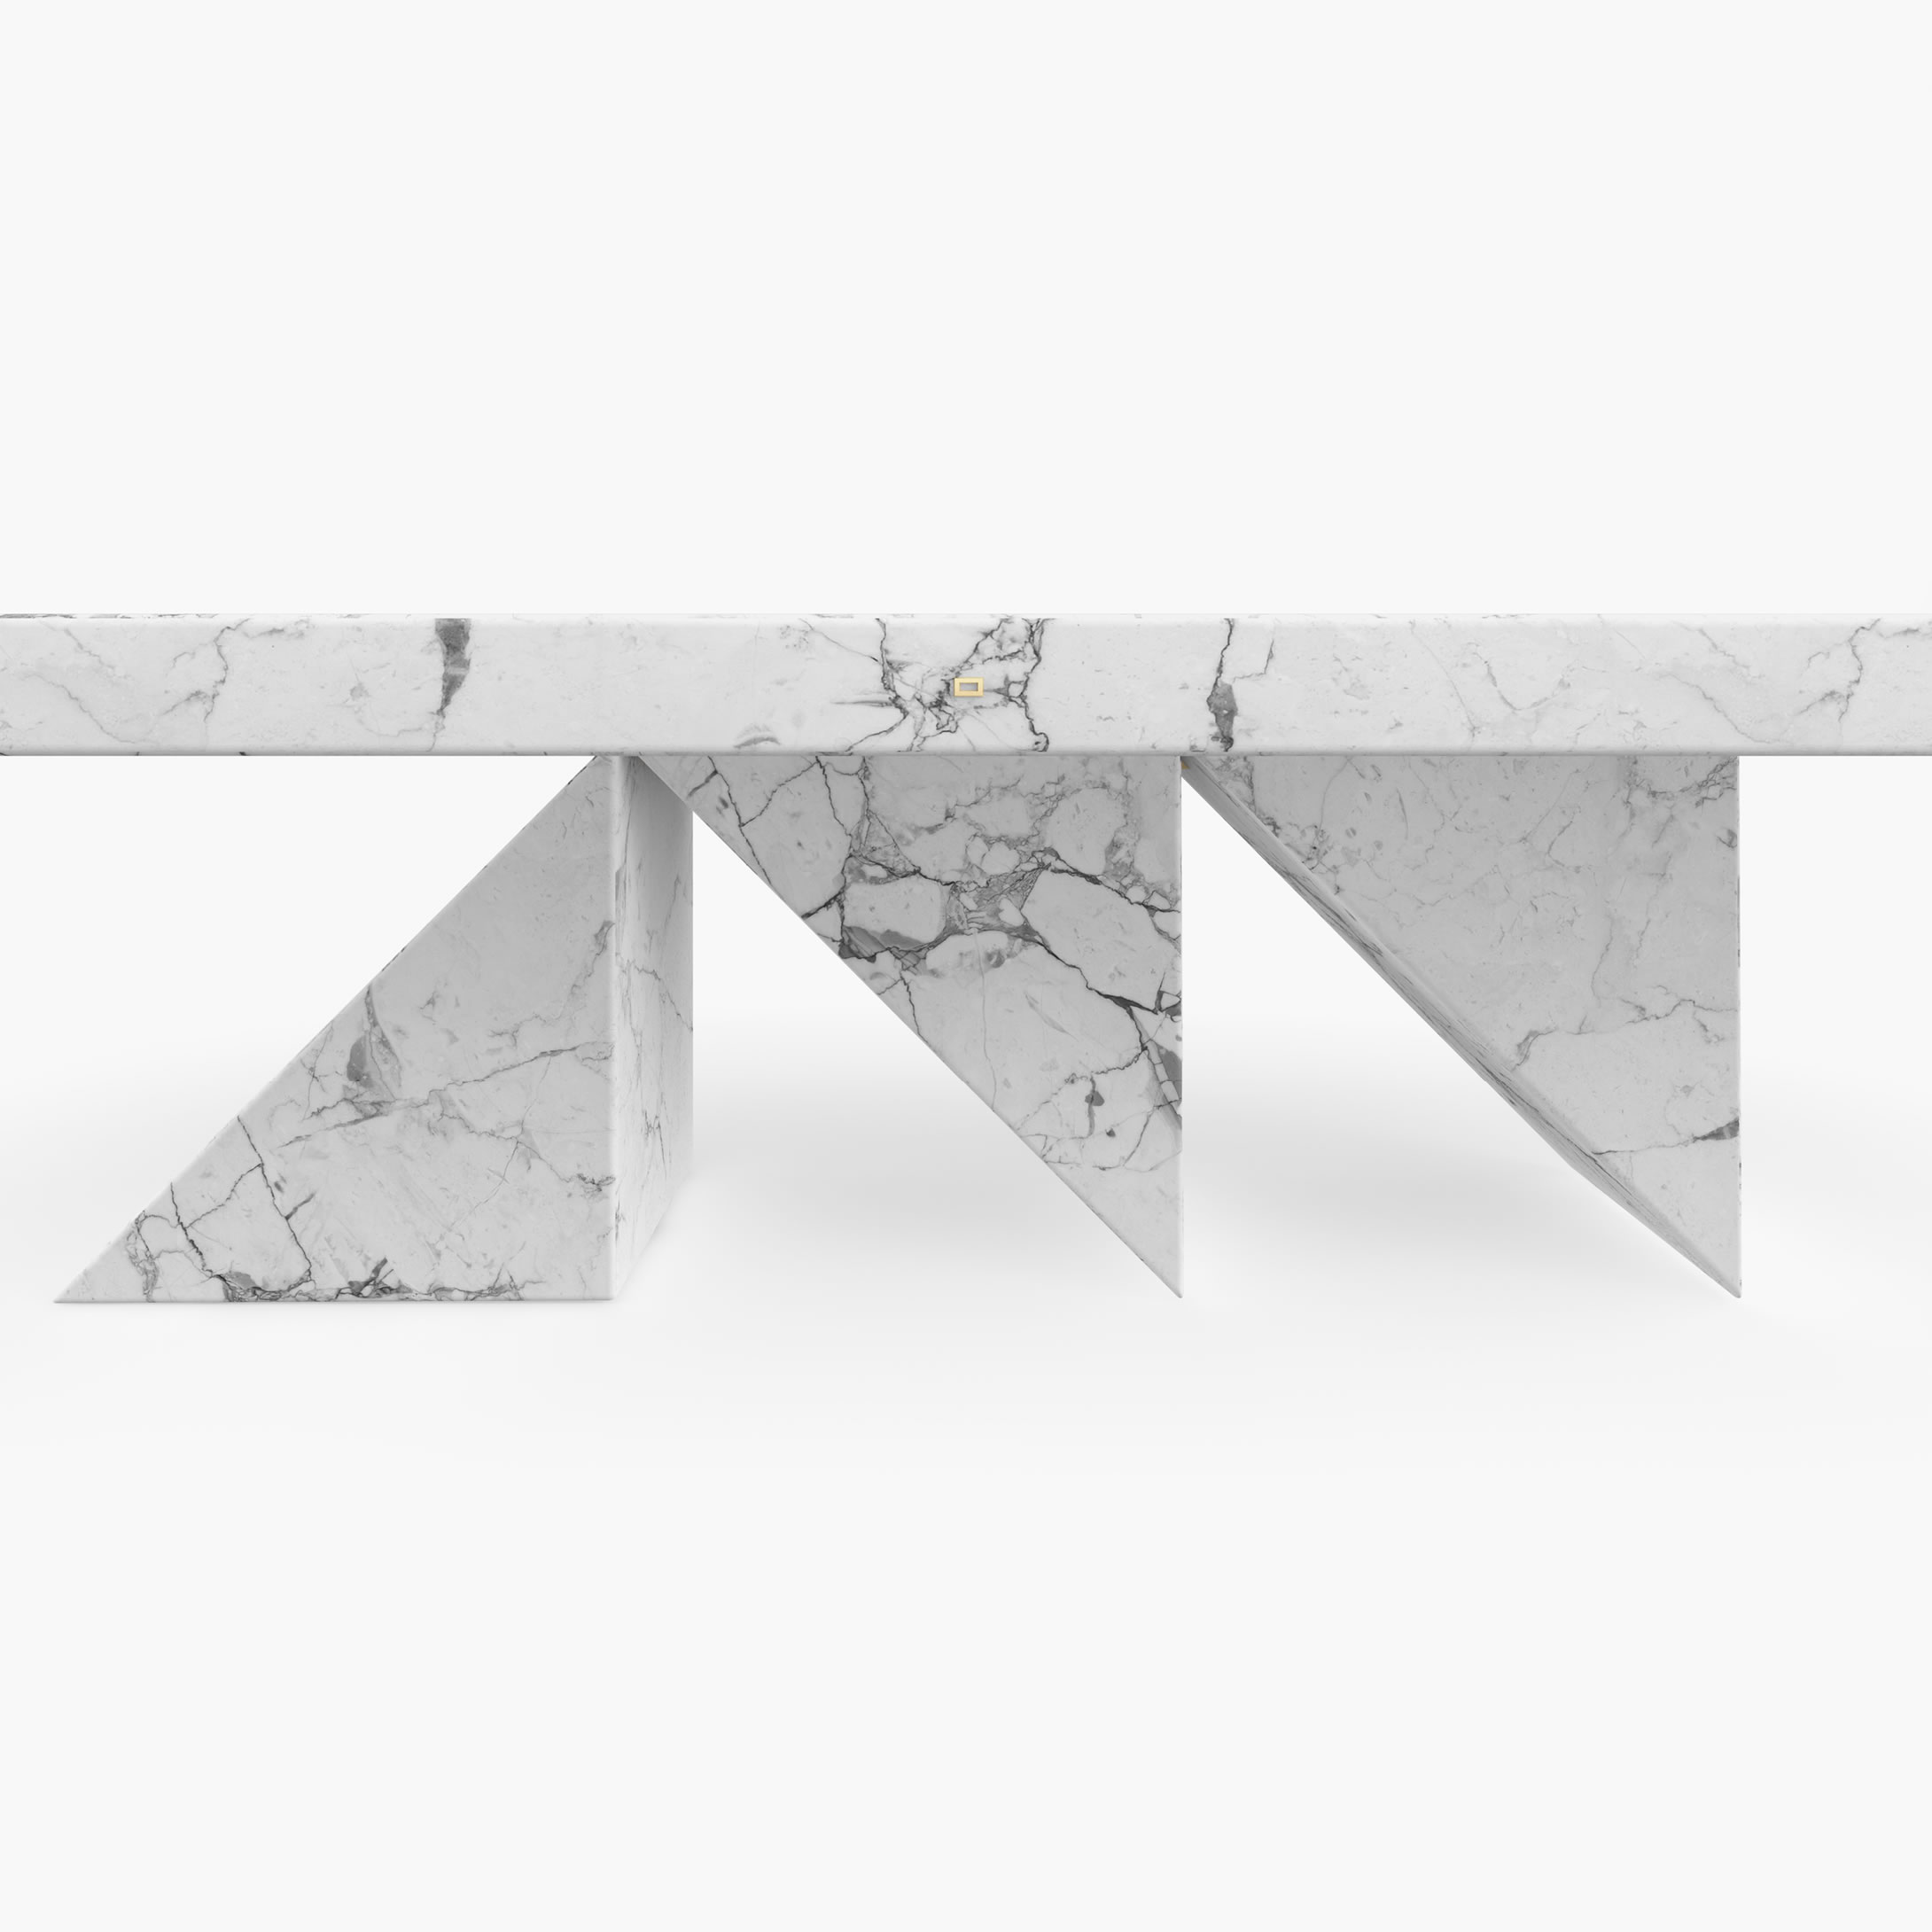 Dining Table Prisms legs White Arabescato Marble architectural Dining Room art work Dining Tables FS 190 1 FELIX SCHWAKE